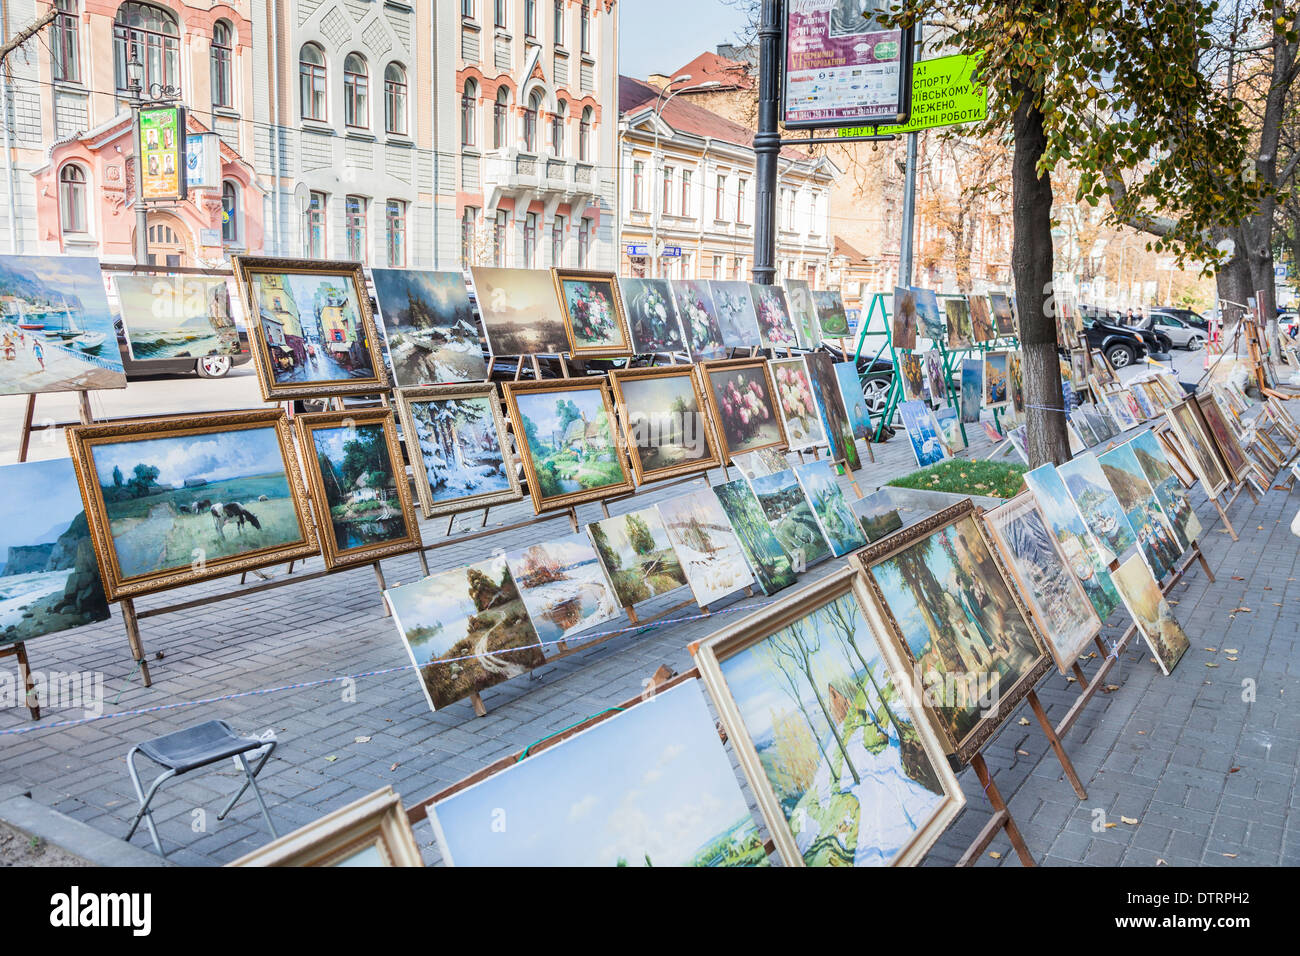 Paintings and pictures for sale to tourists as souvenirs on the street in Kiev, Ukraine, eastern Europe Stock Photo